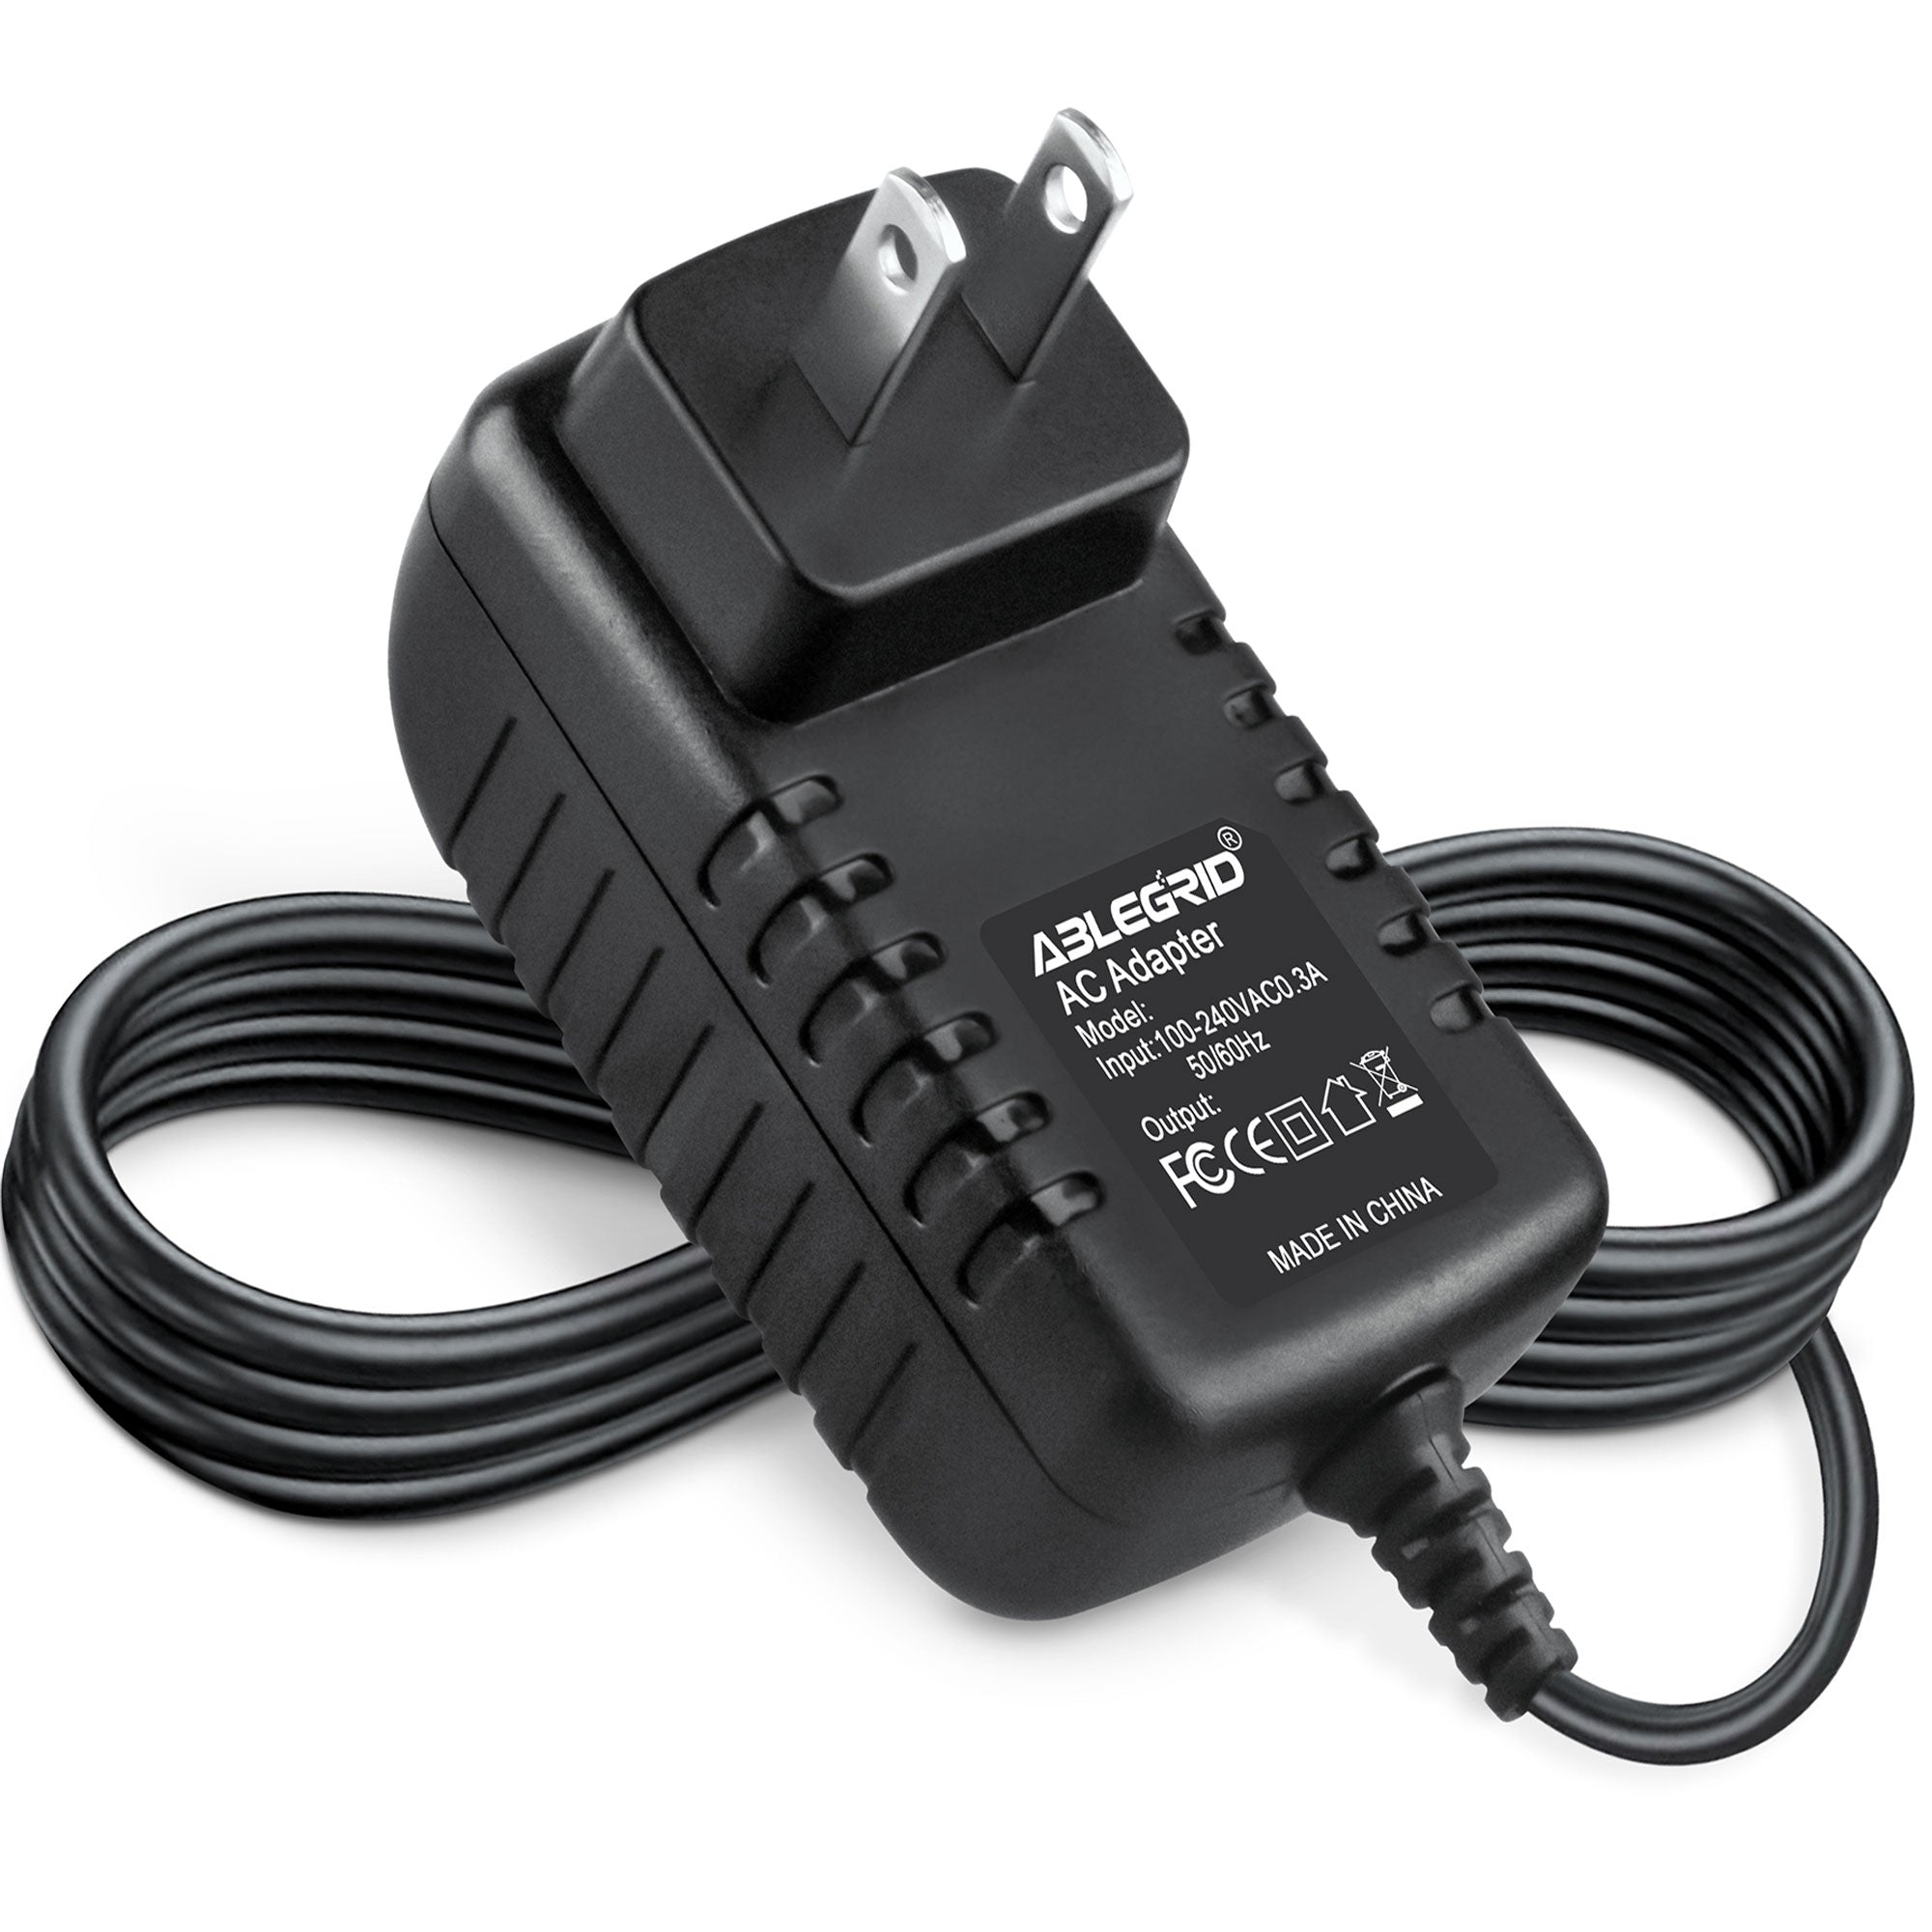 AbleGrid AC / DC Adapter for Cobra MicroTalk PR190, PR190-2 VP, PR 3800-2DX VP 2-Way Radio Power Supply Cord Cable PS Charger Input: 100 - 240 VAC 50/60Hz Worldwide Voltage Use Mains PSU